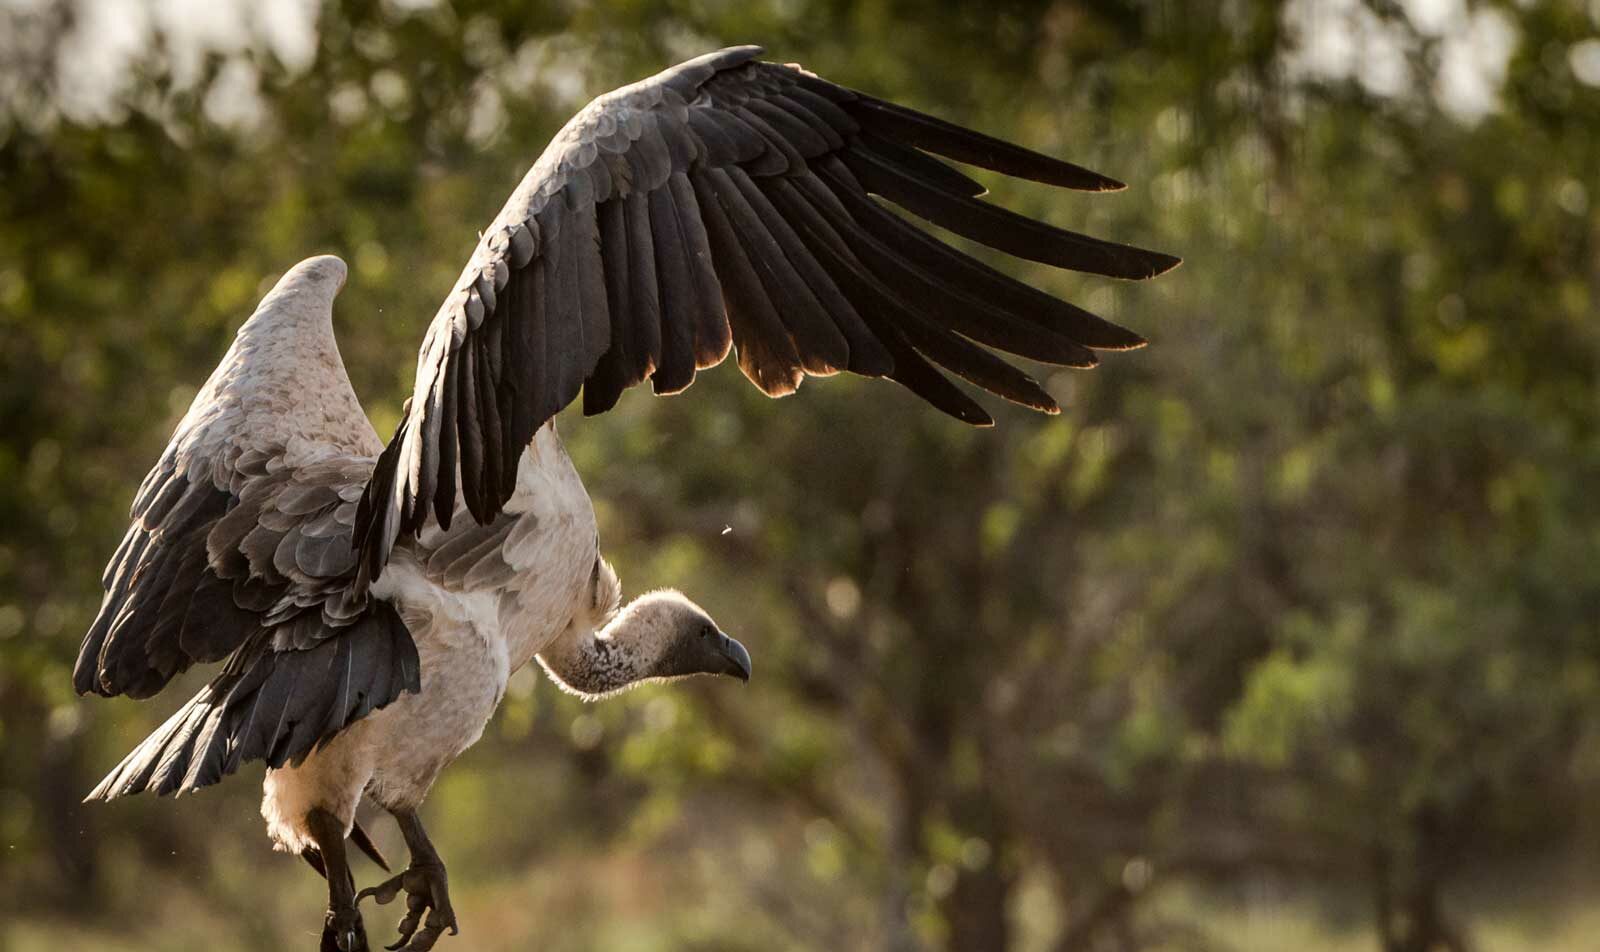 A white-backed vulture closes in on an abandoned kill